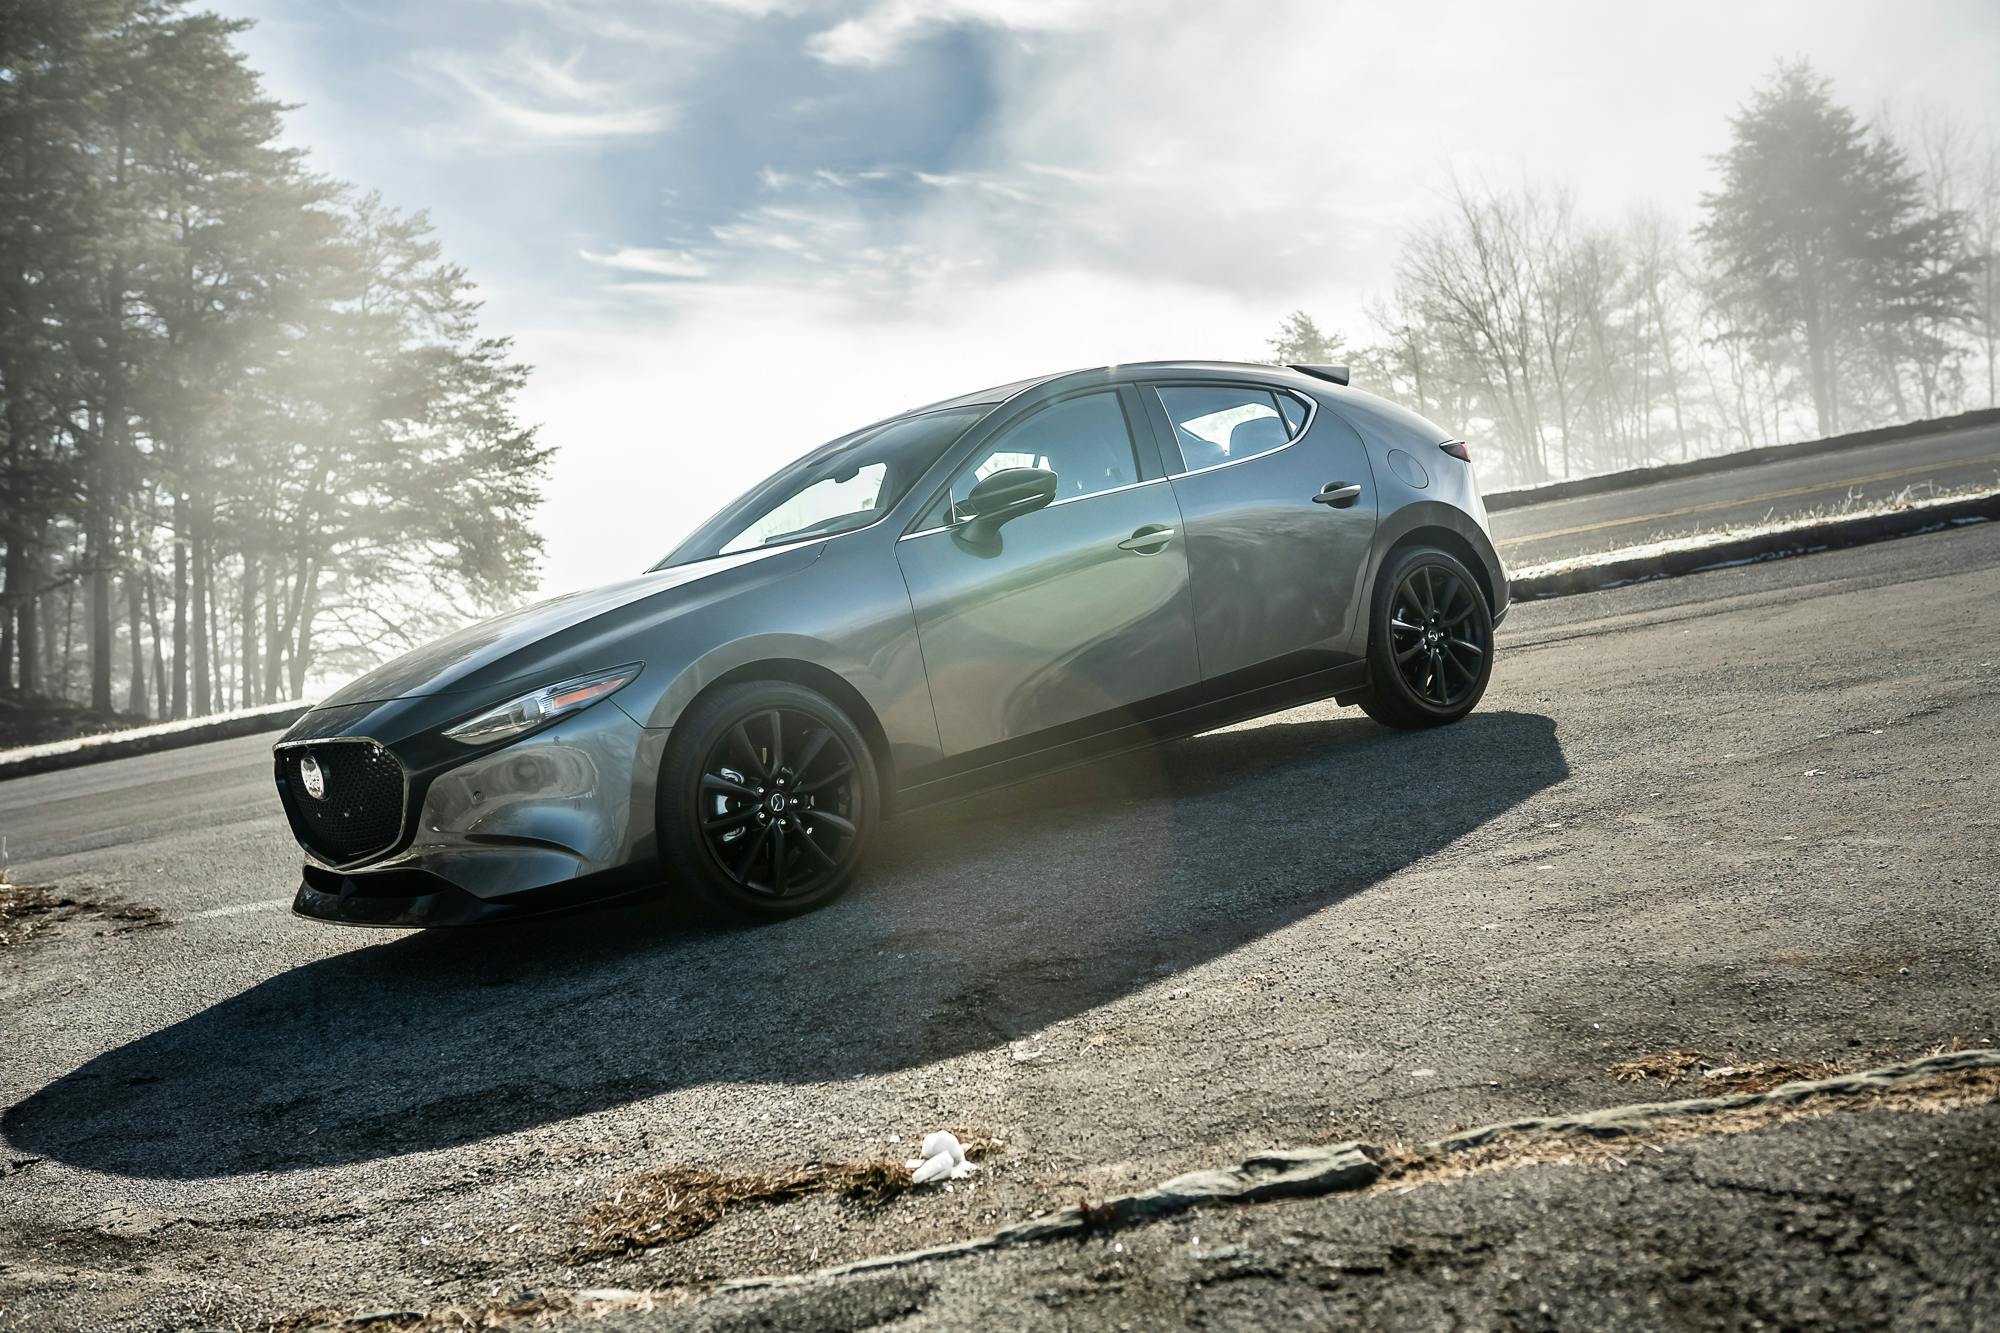 Tested: 2021 Mazda 3 2.5 Turbo Is a Tuner Car for Grownups